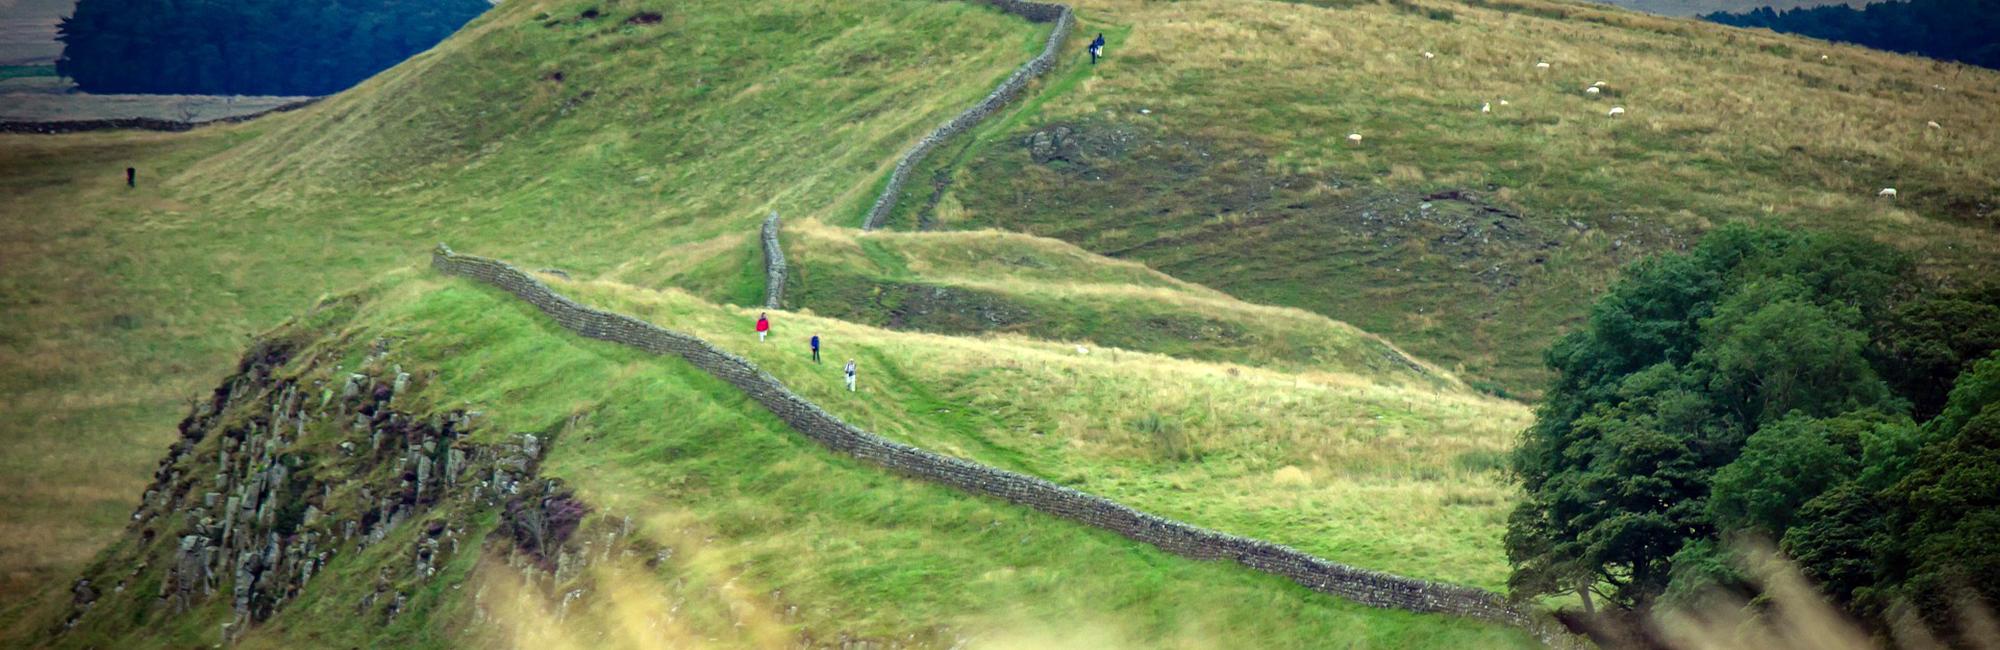 Hadrian's Wall Path - 8 days walking in England | S-Cape Travel UK